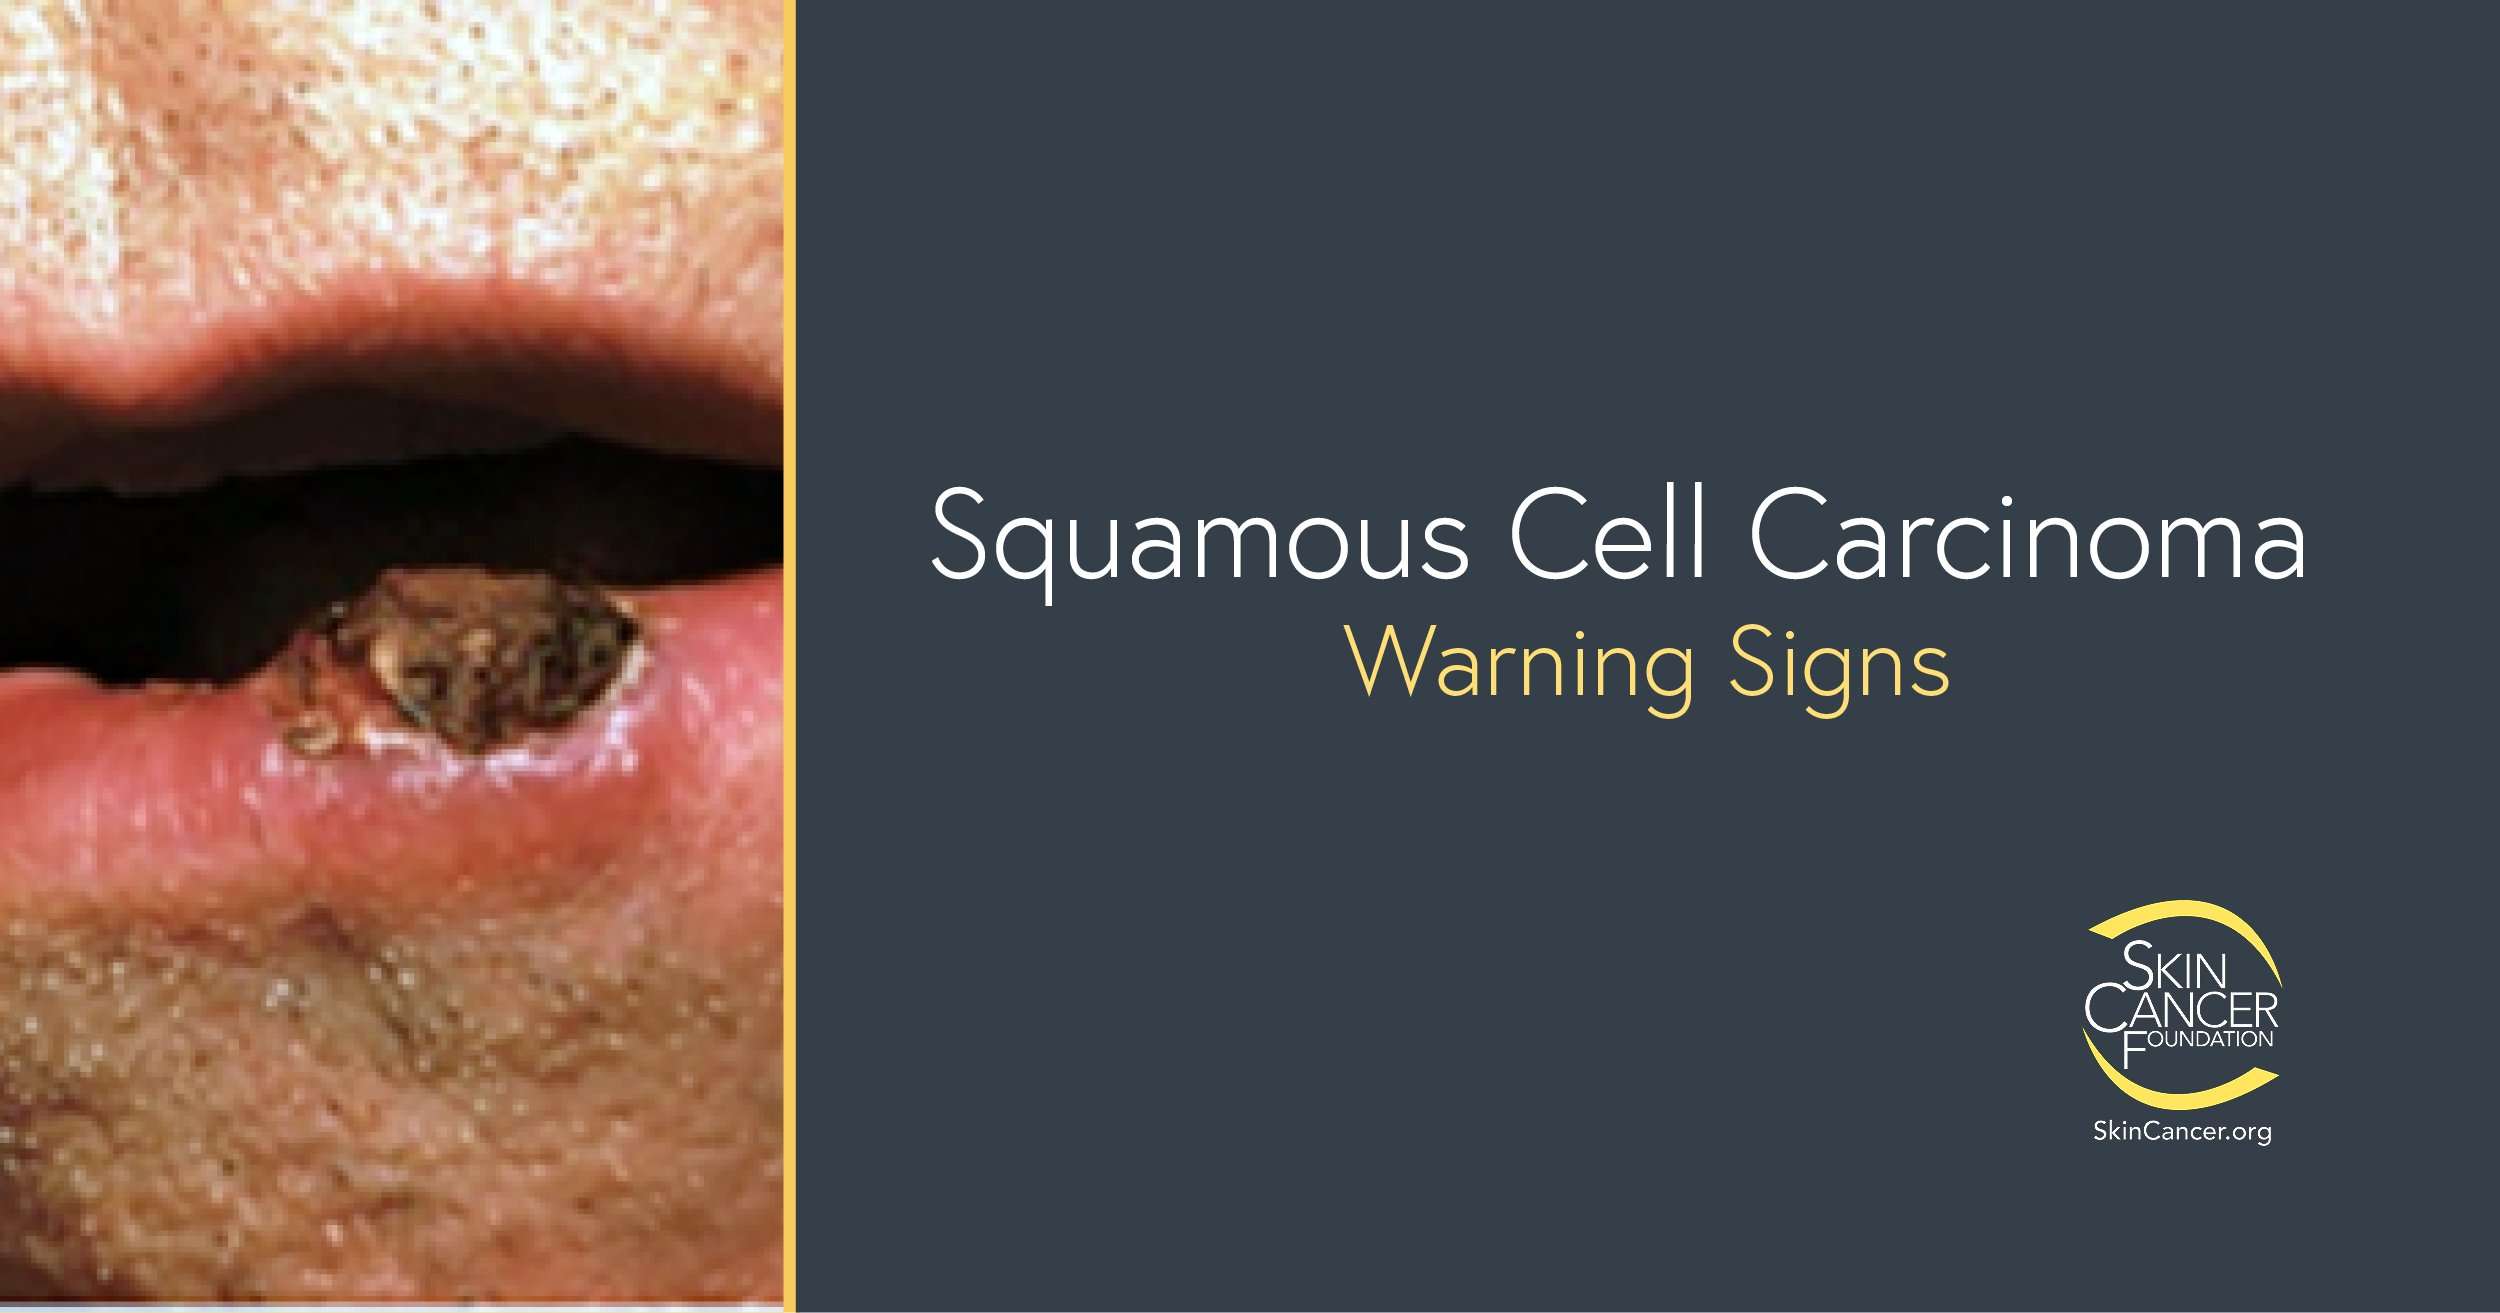 Squamous Cell Carcinoma Warning Signs and Images